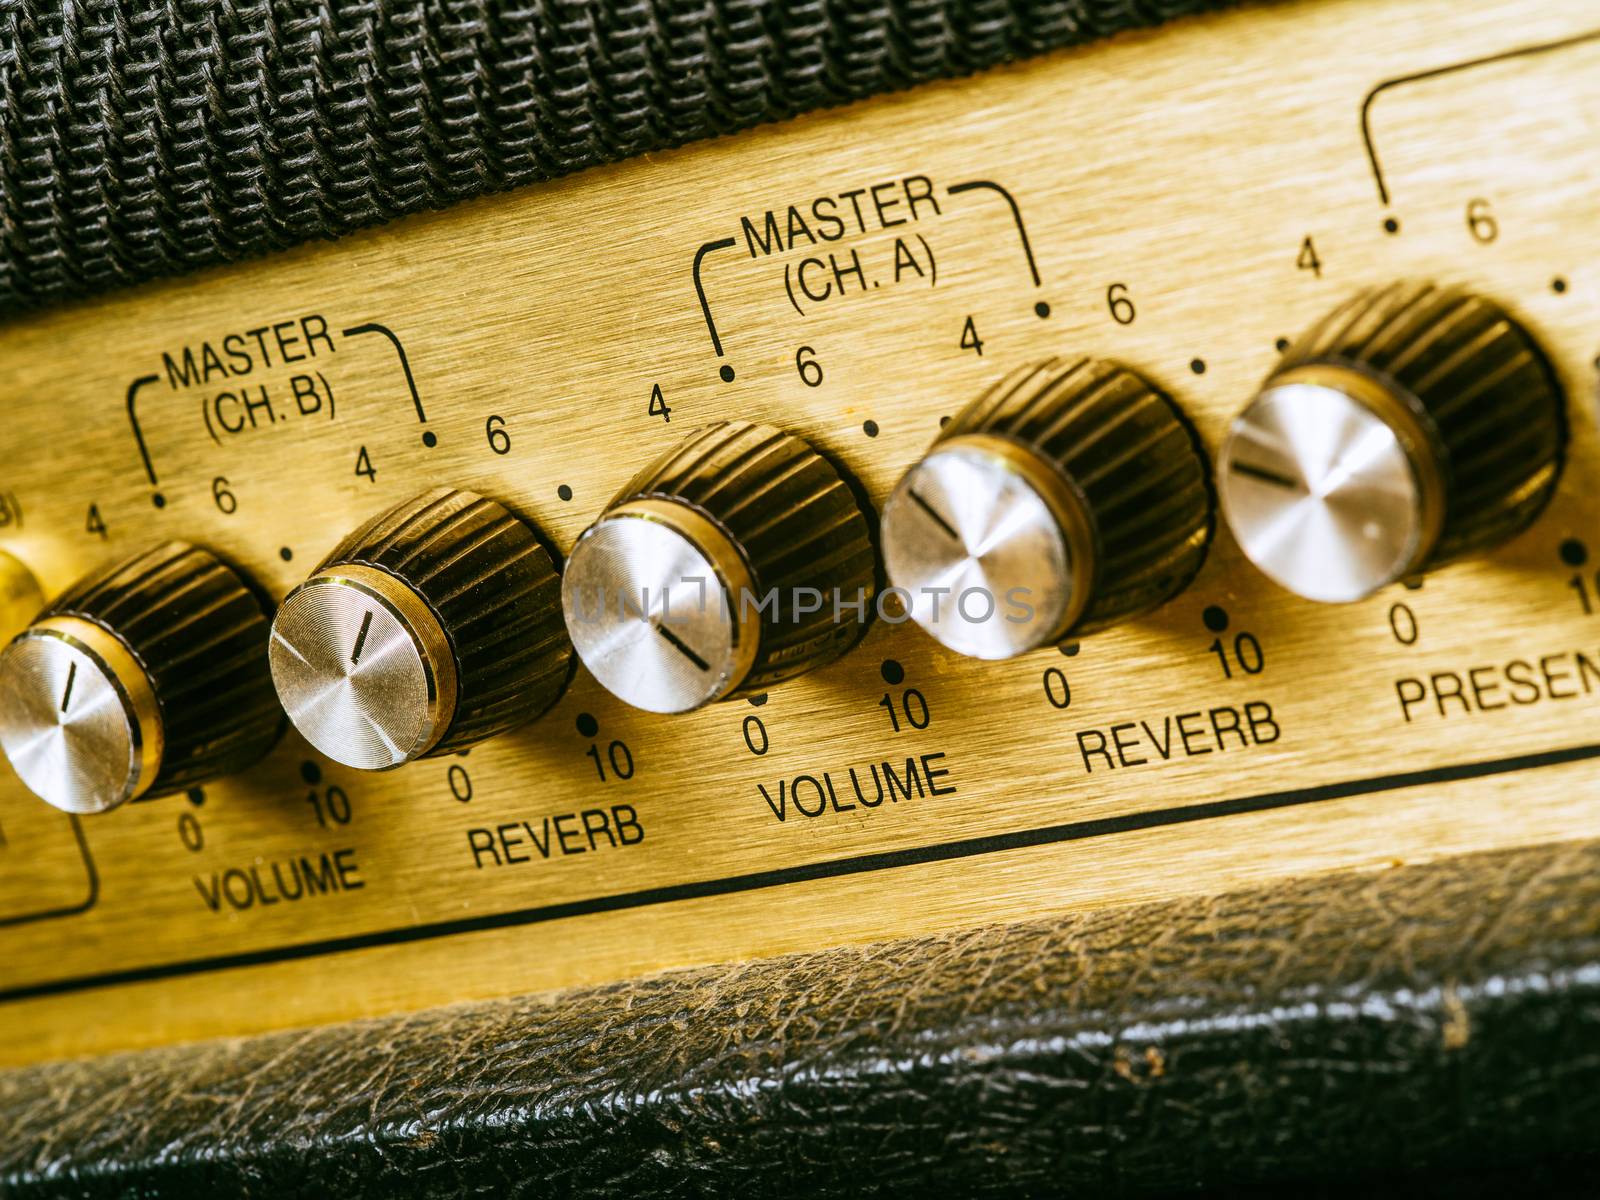 Macro photo of a vintage electric guitar amplifier focusing on the volume knob which is set at ten.